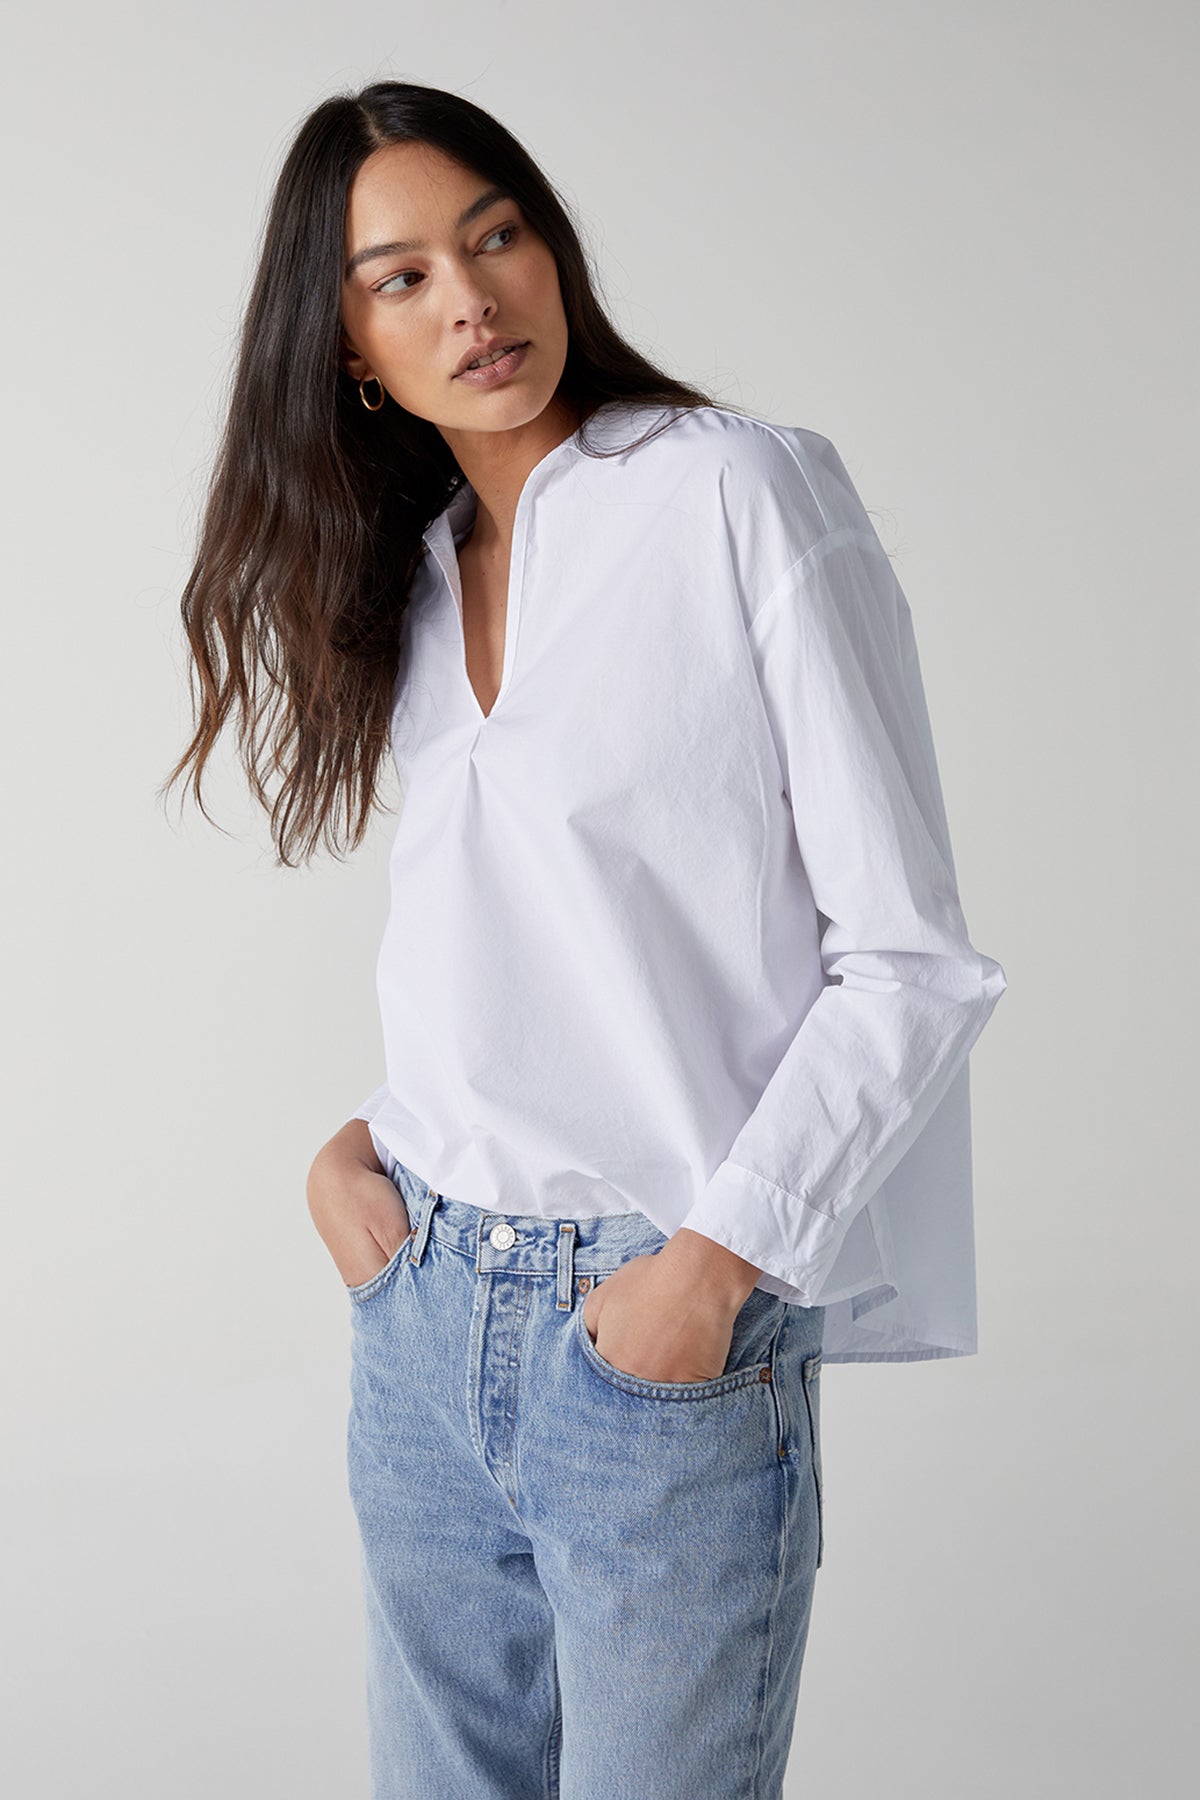 Velvet by Jenny Graham Brea Cotton Shirt in White, Tucked Into Blue Denim Front and Side Close Up-26002779603137